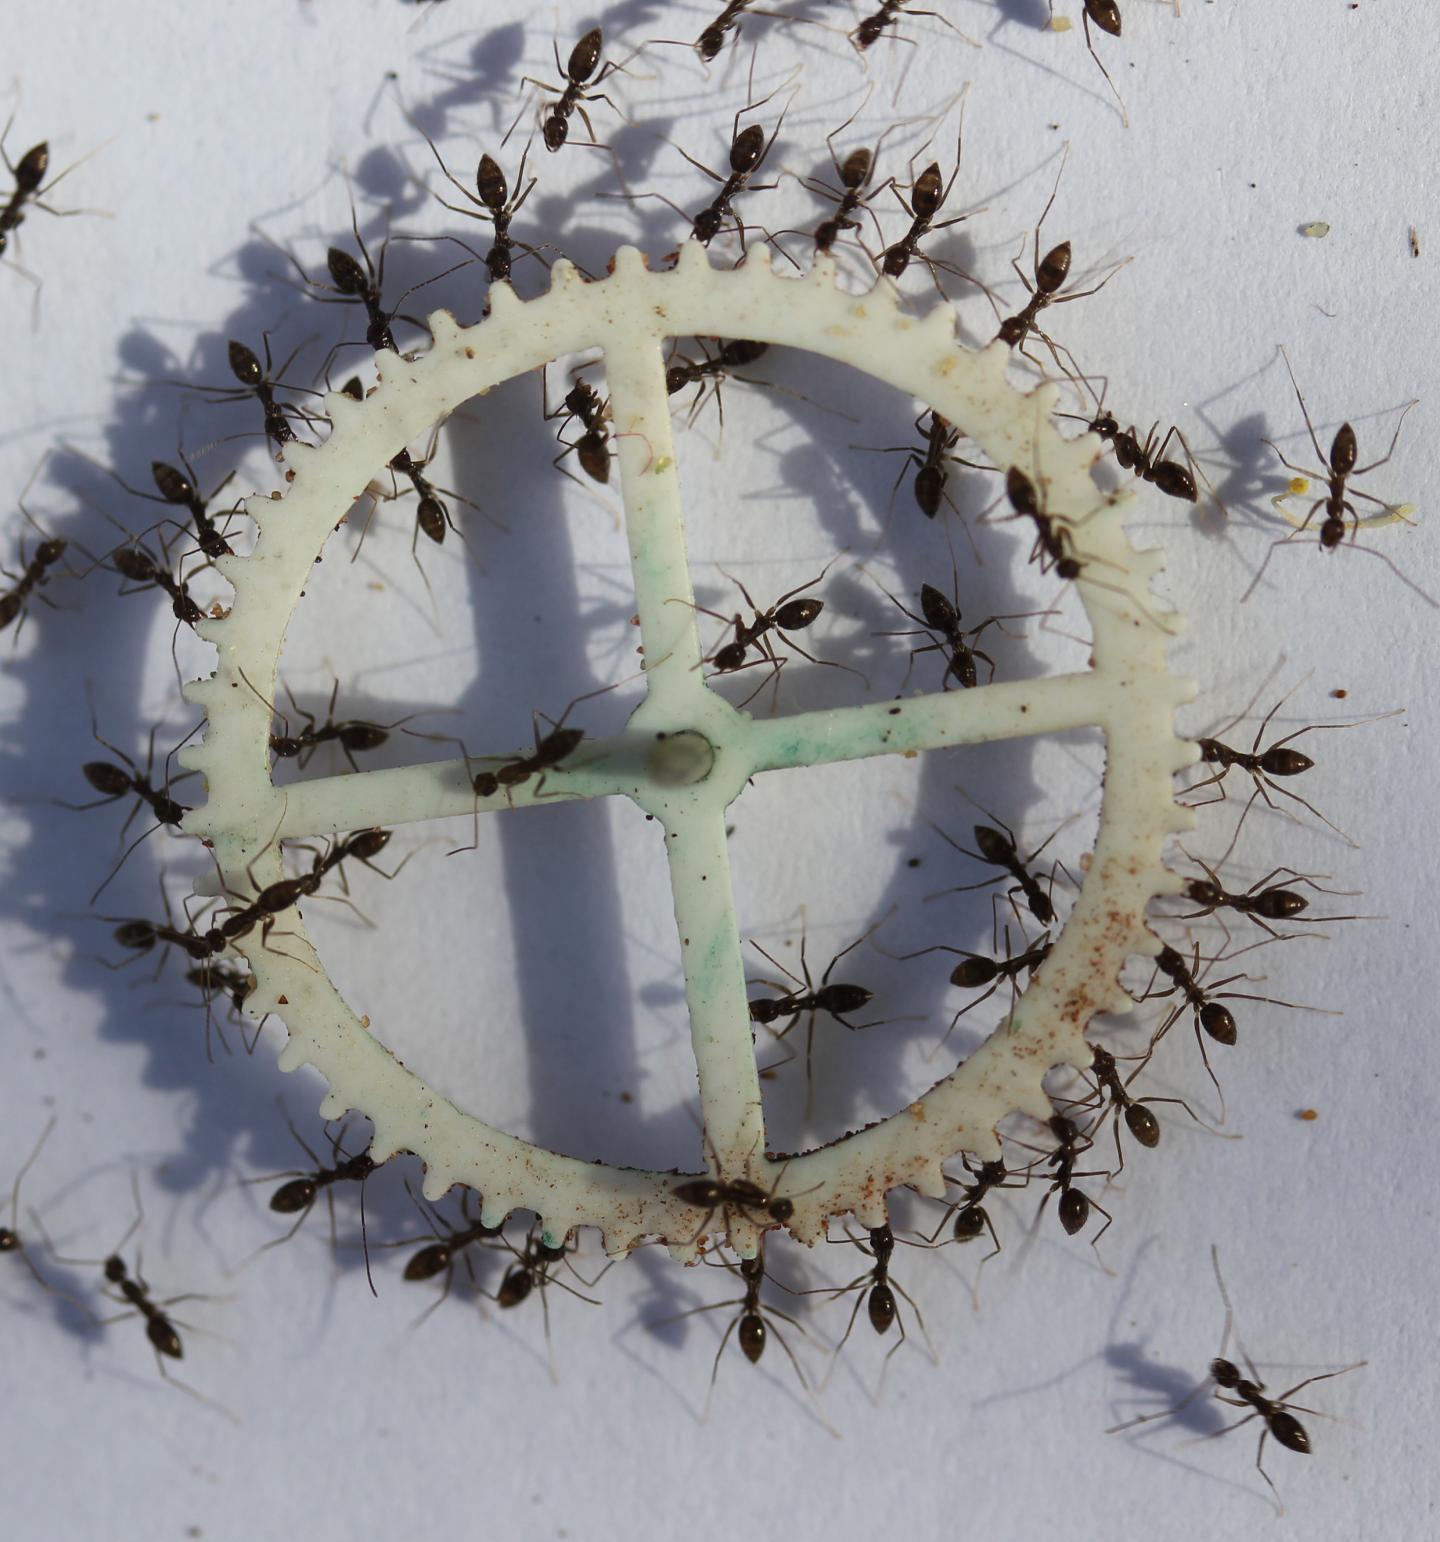 Food-Carrying Ants Use Collective Problem Solving to Get Through or Around Obstacles